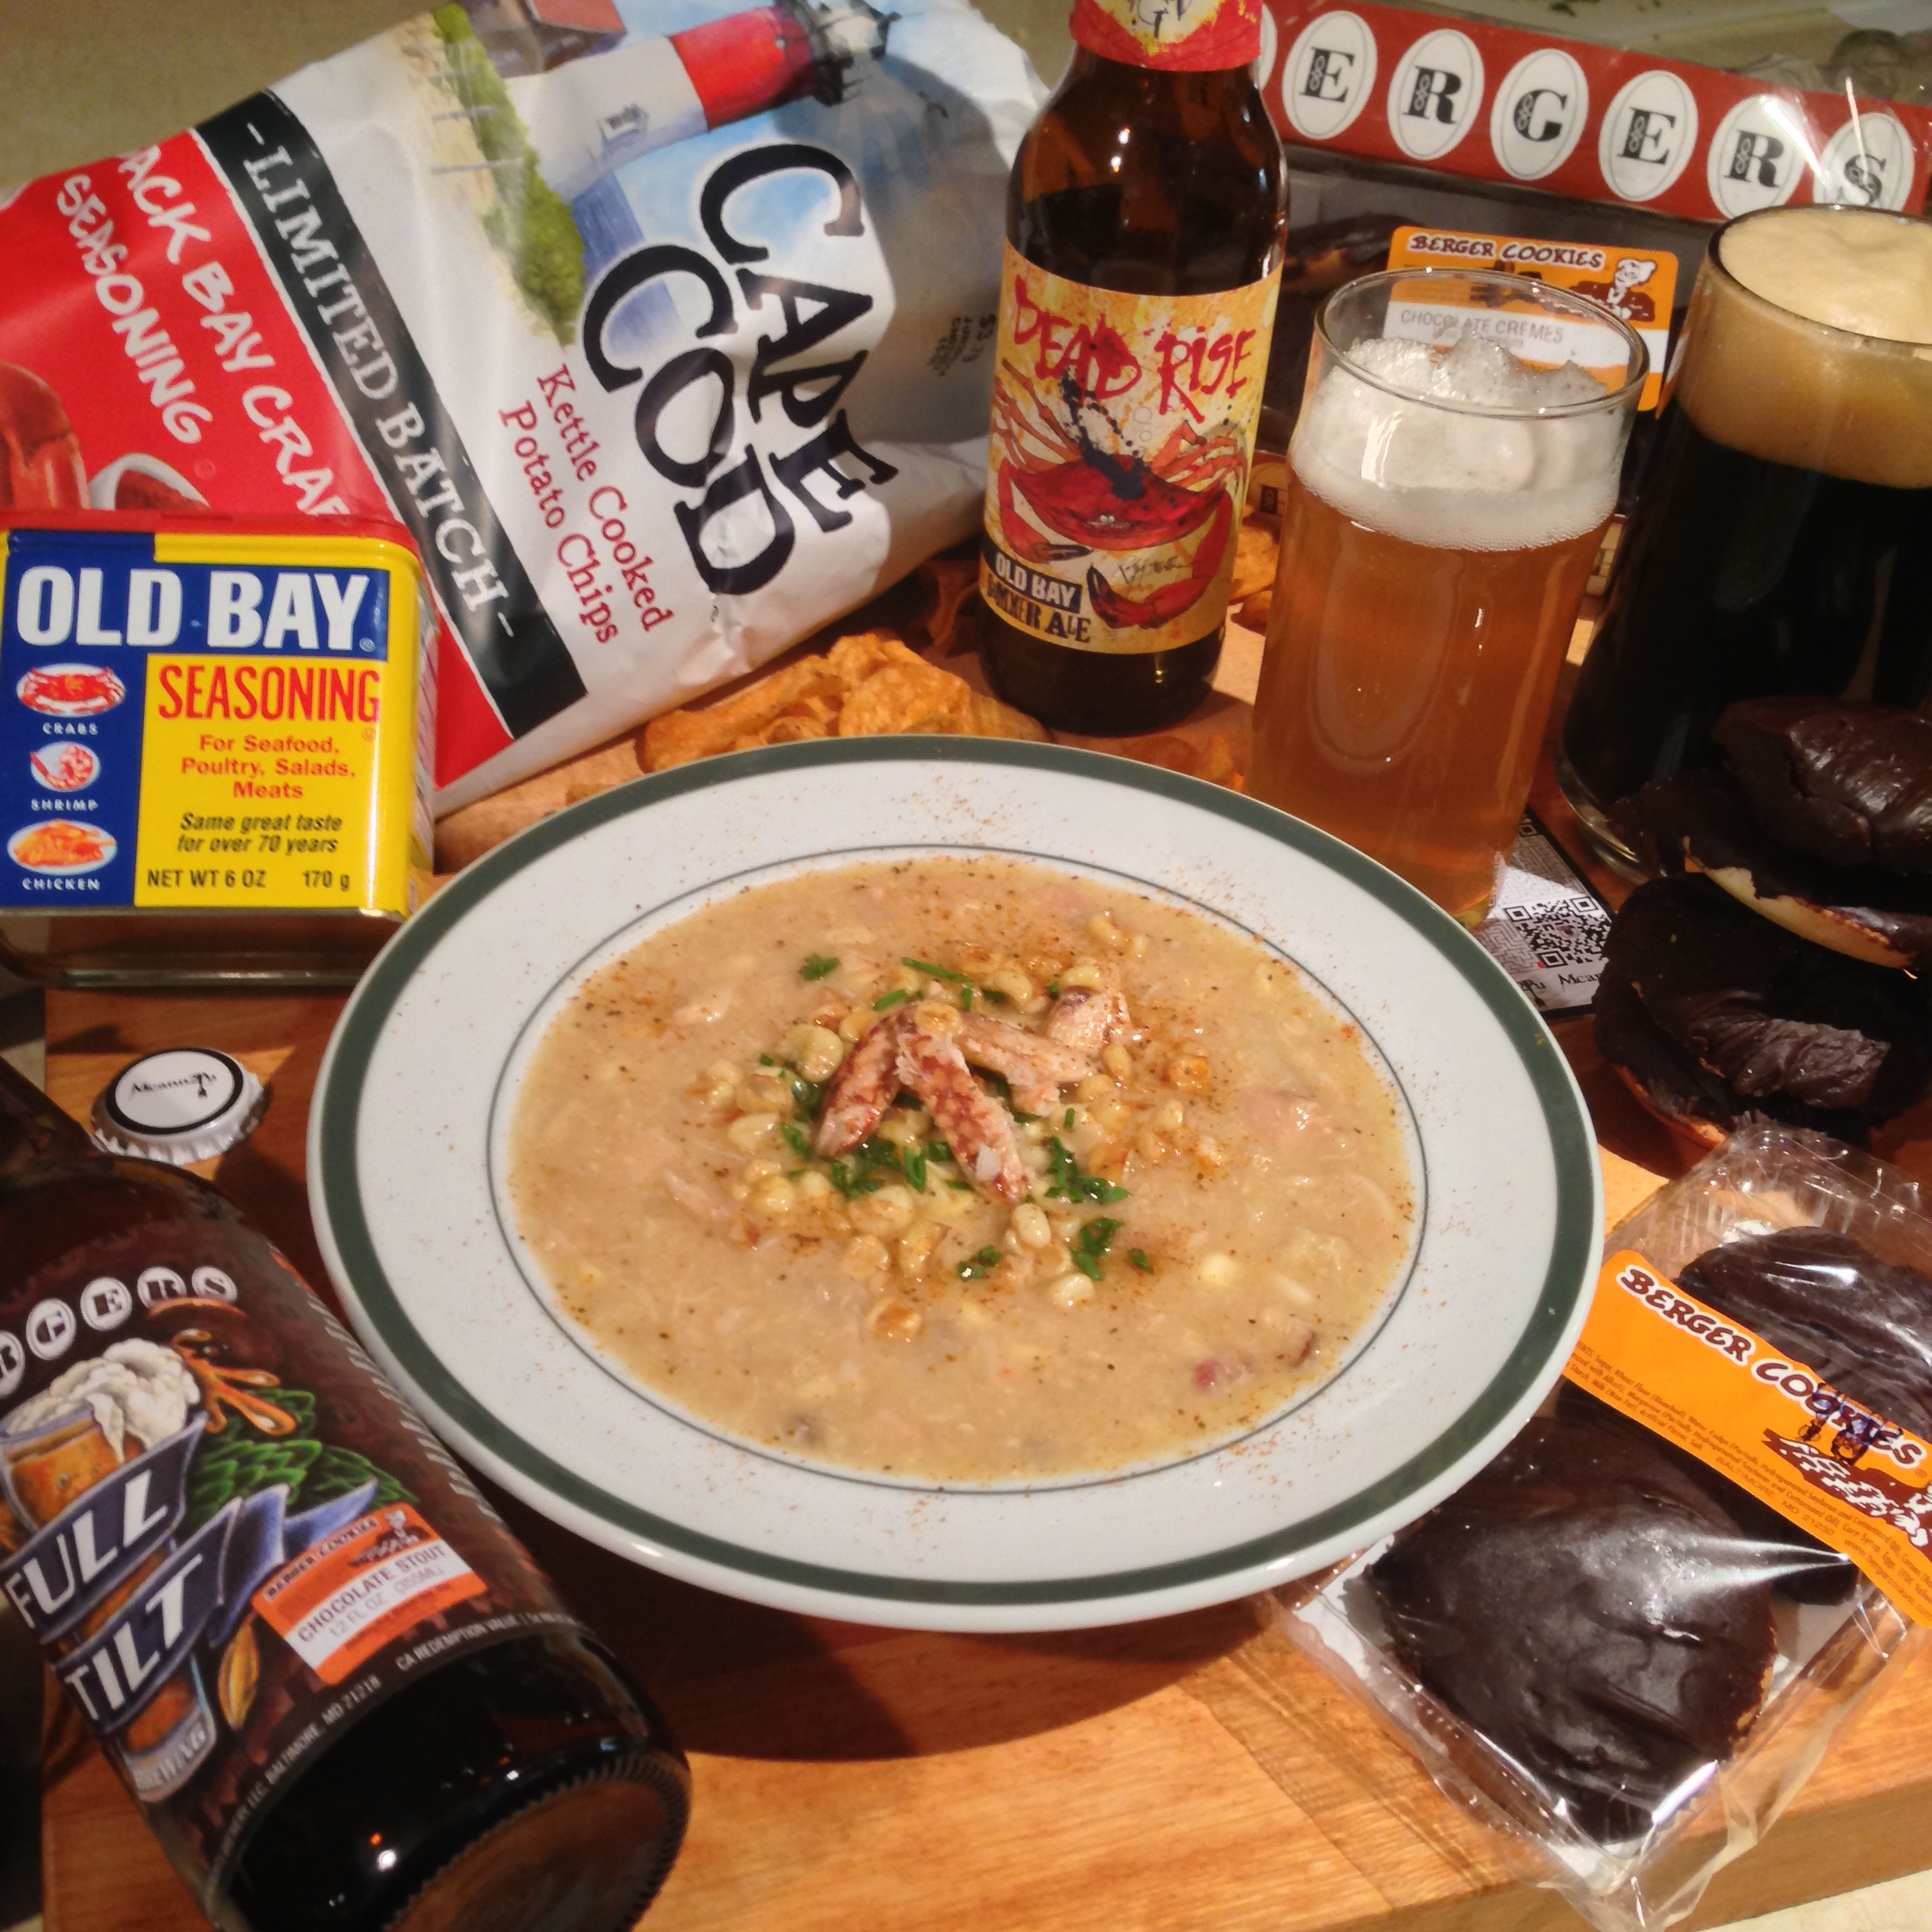 Corn and Crab Chowder Berger Cookie Chocolate Stout